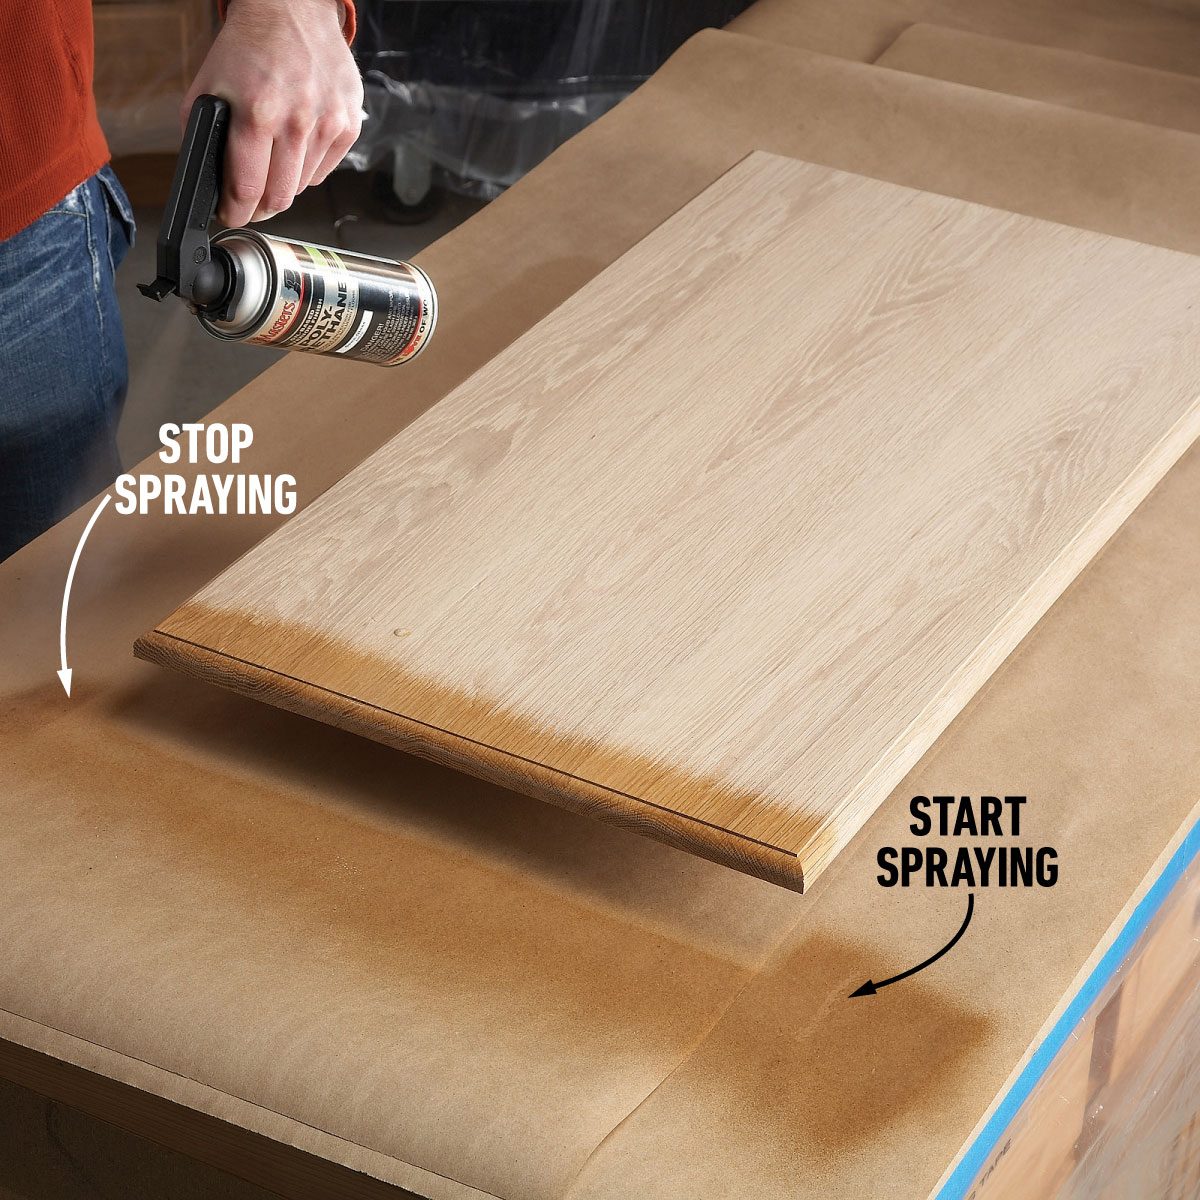 9 Tips For Spraying Varnish On Wood Start The Polyurethane Spray Paint Off The Edge